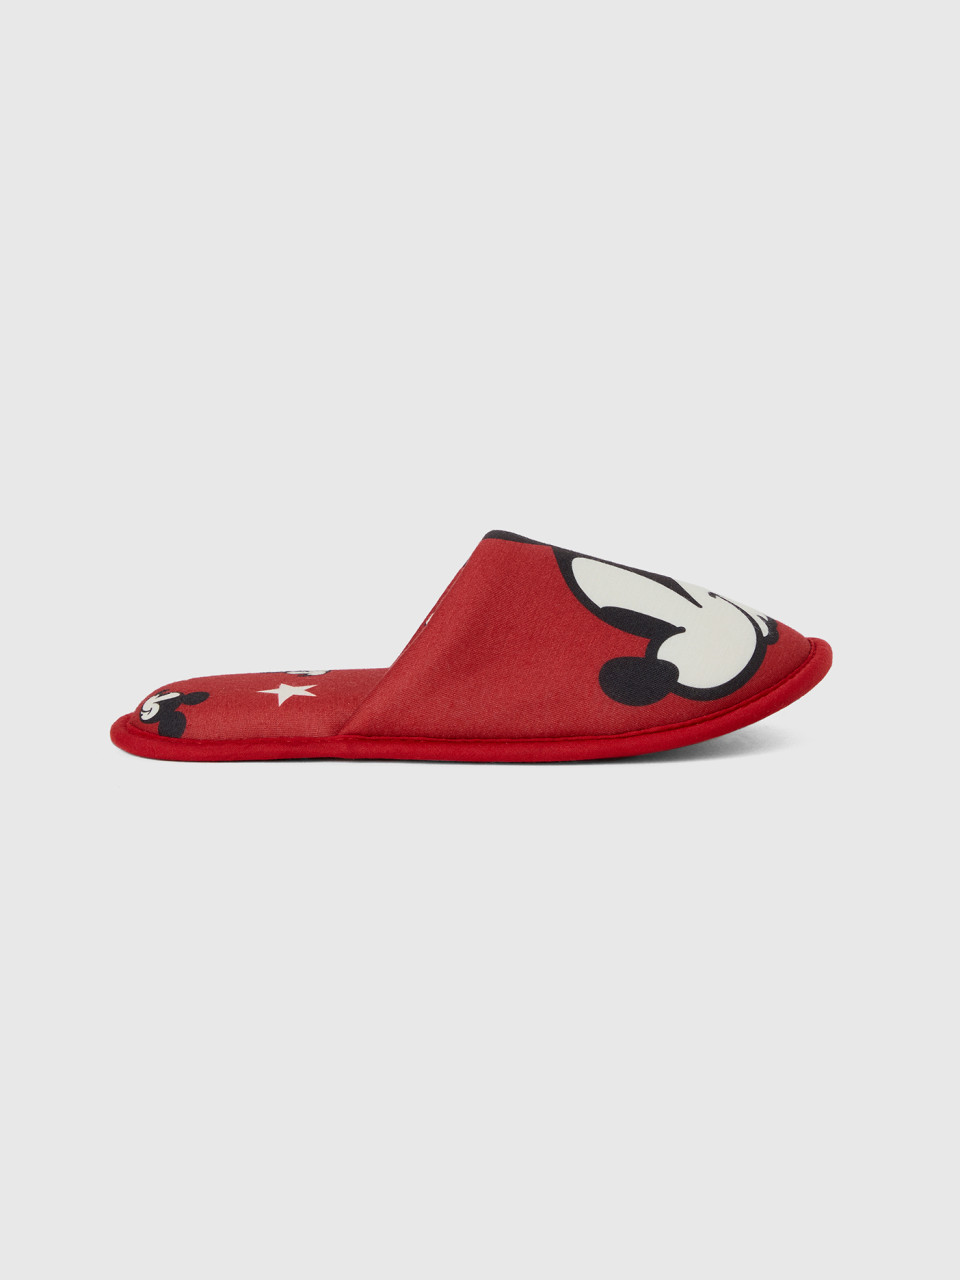 Benetton, Chaussons Mickey Rouges, Rouge, Enfants